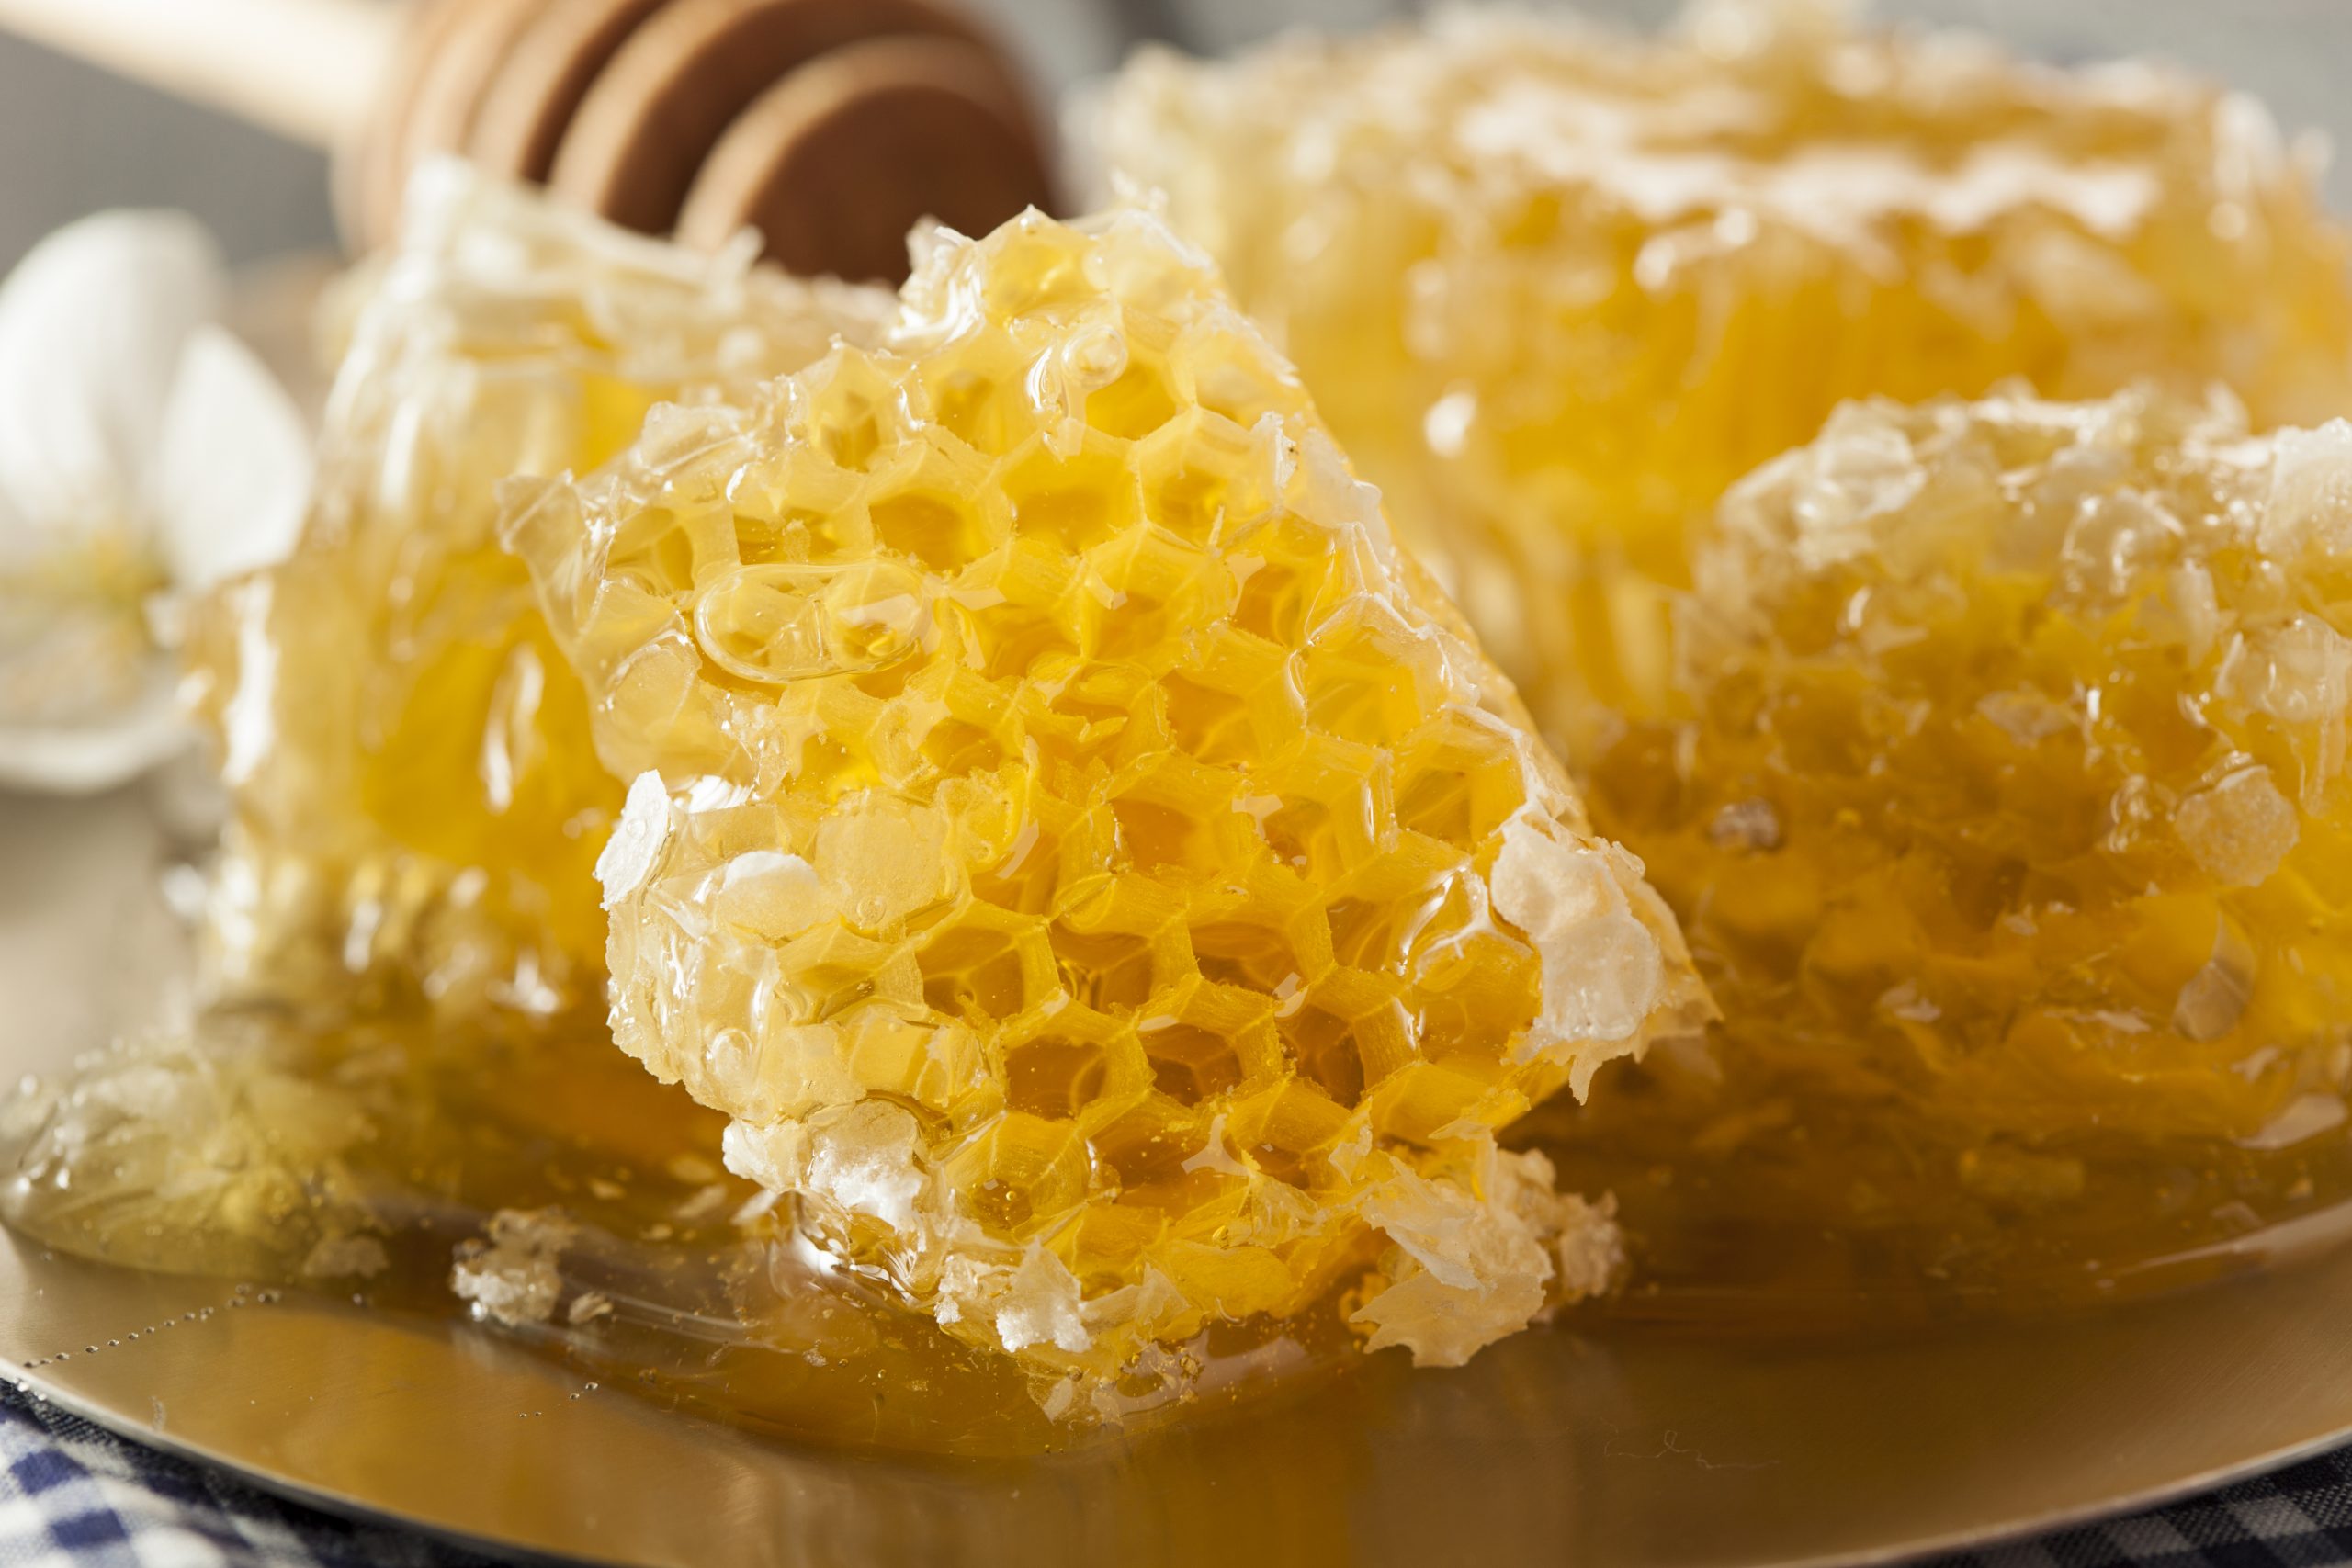 Raw Honey Hacks You Probably Never Heard of Before